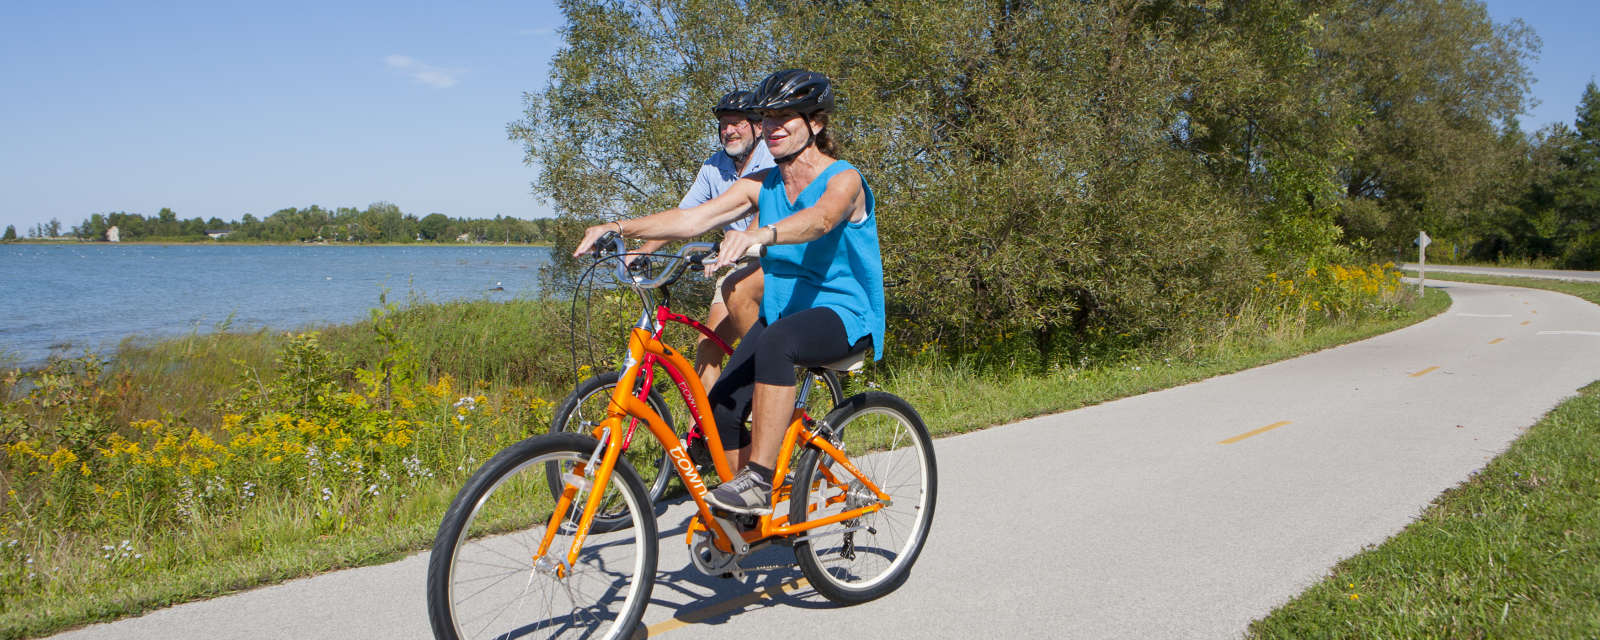 Happy couple on a cycling tour using a red and orange bike